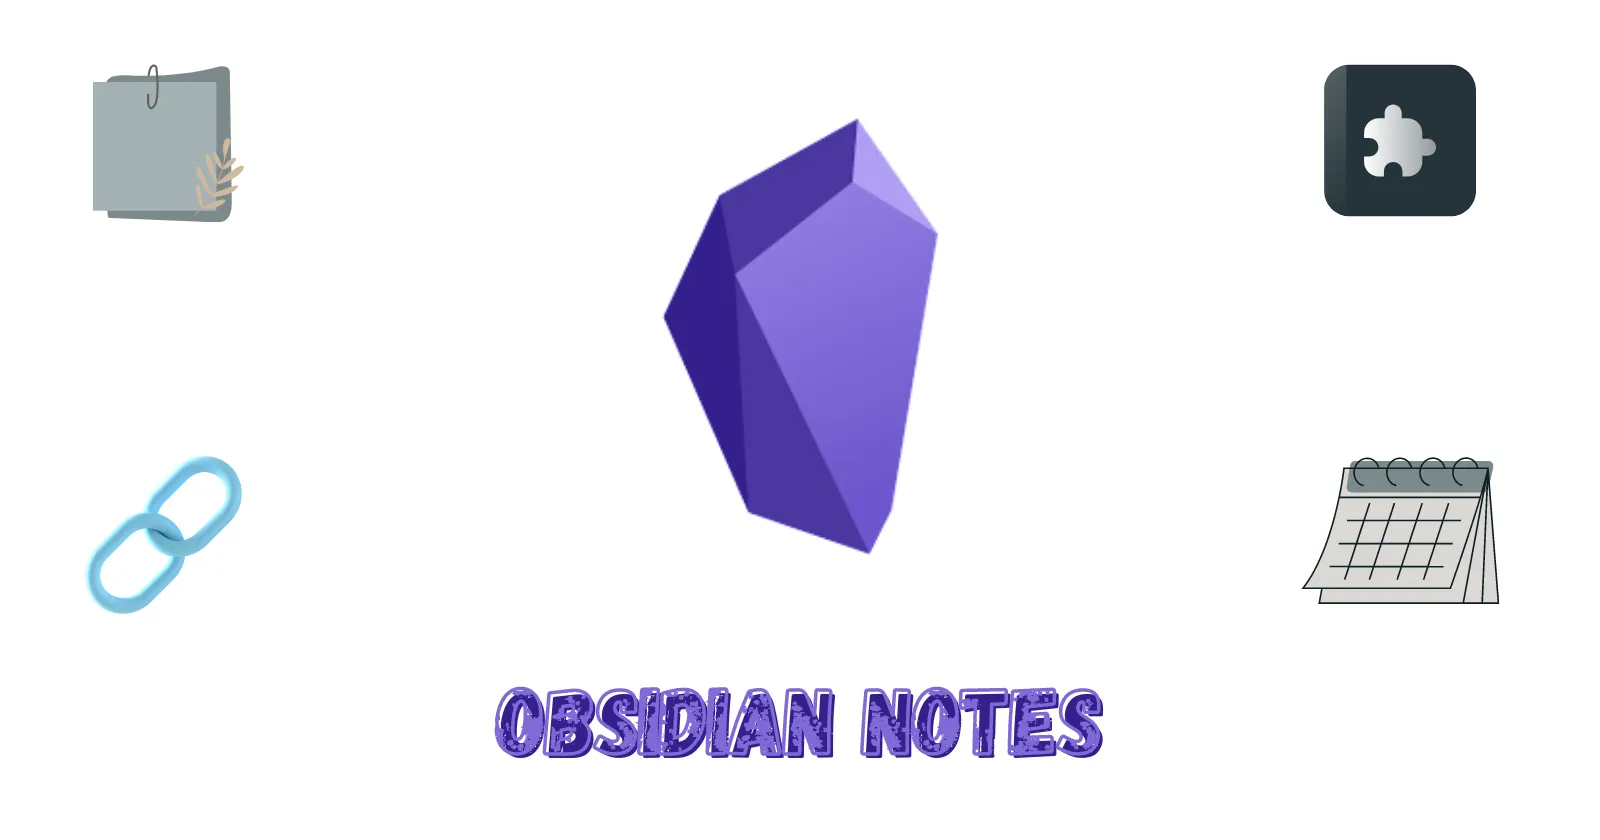 What is Obsidian Notes